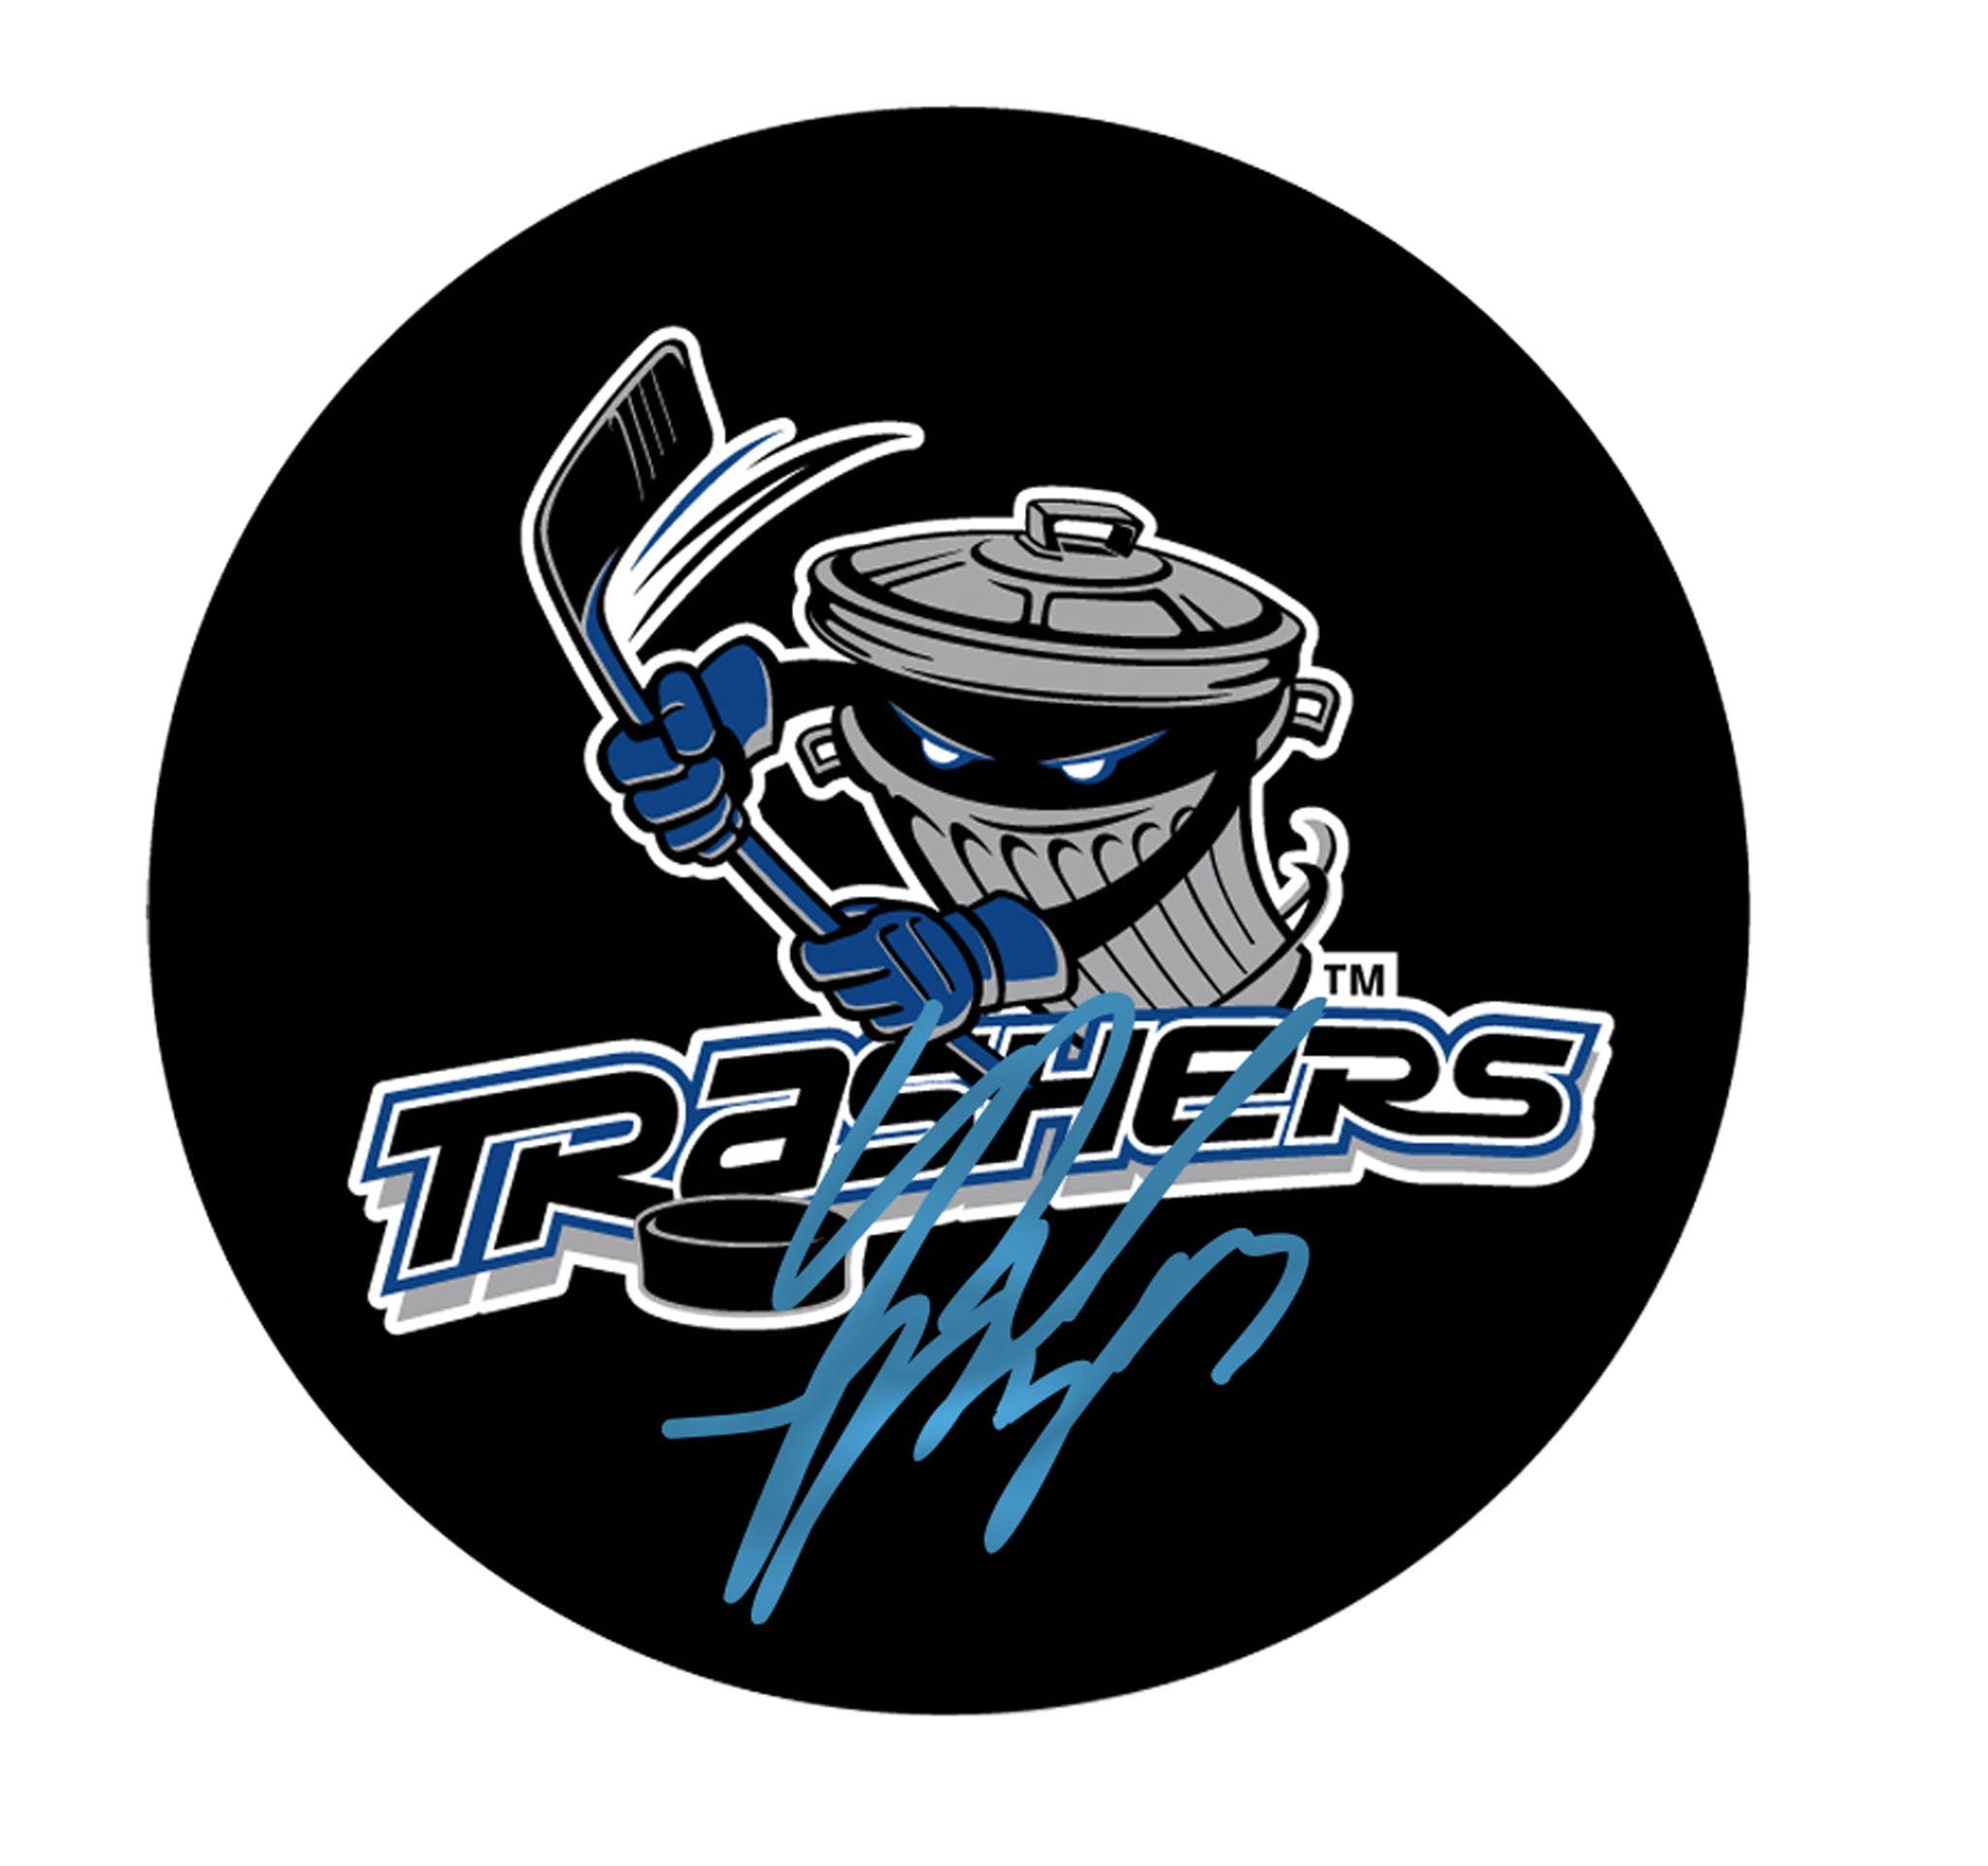 Danbury Trashers Signed Memorabilia and Collectibles